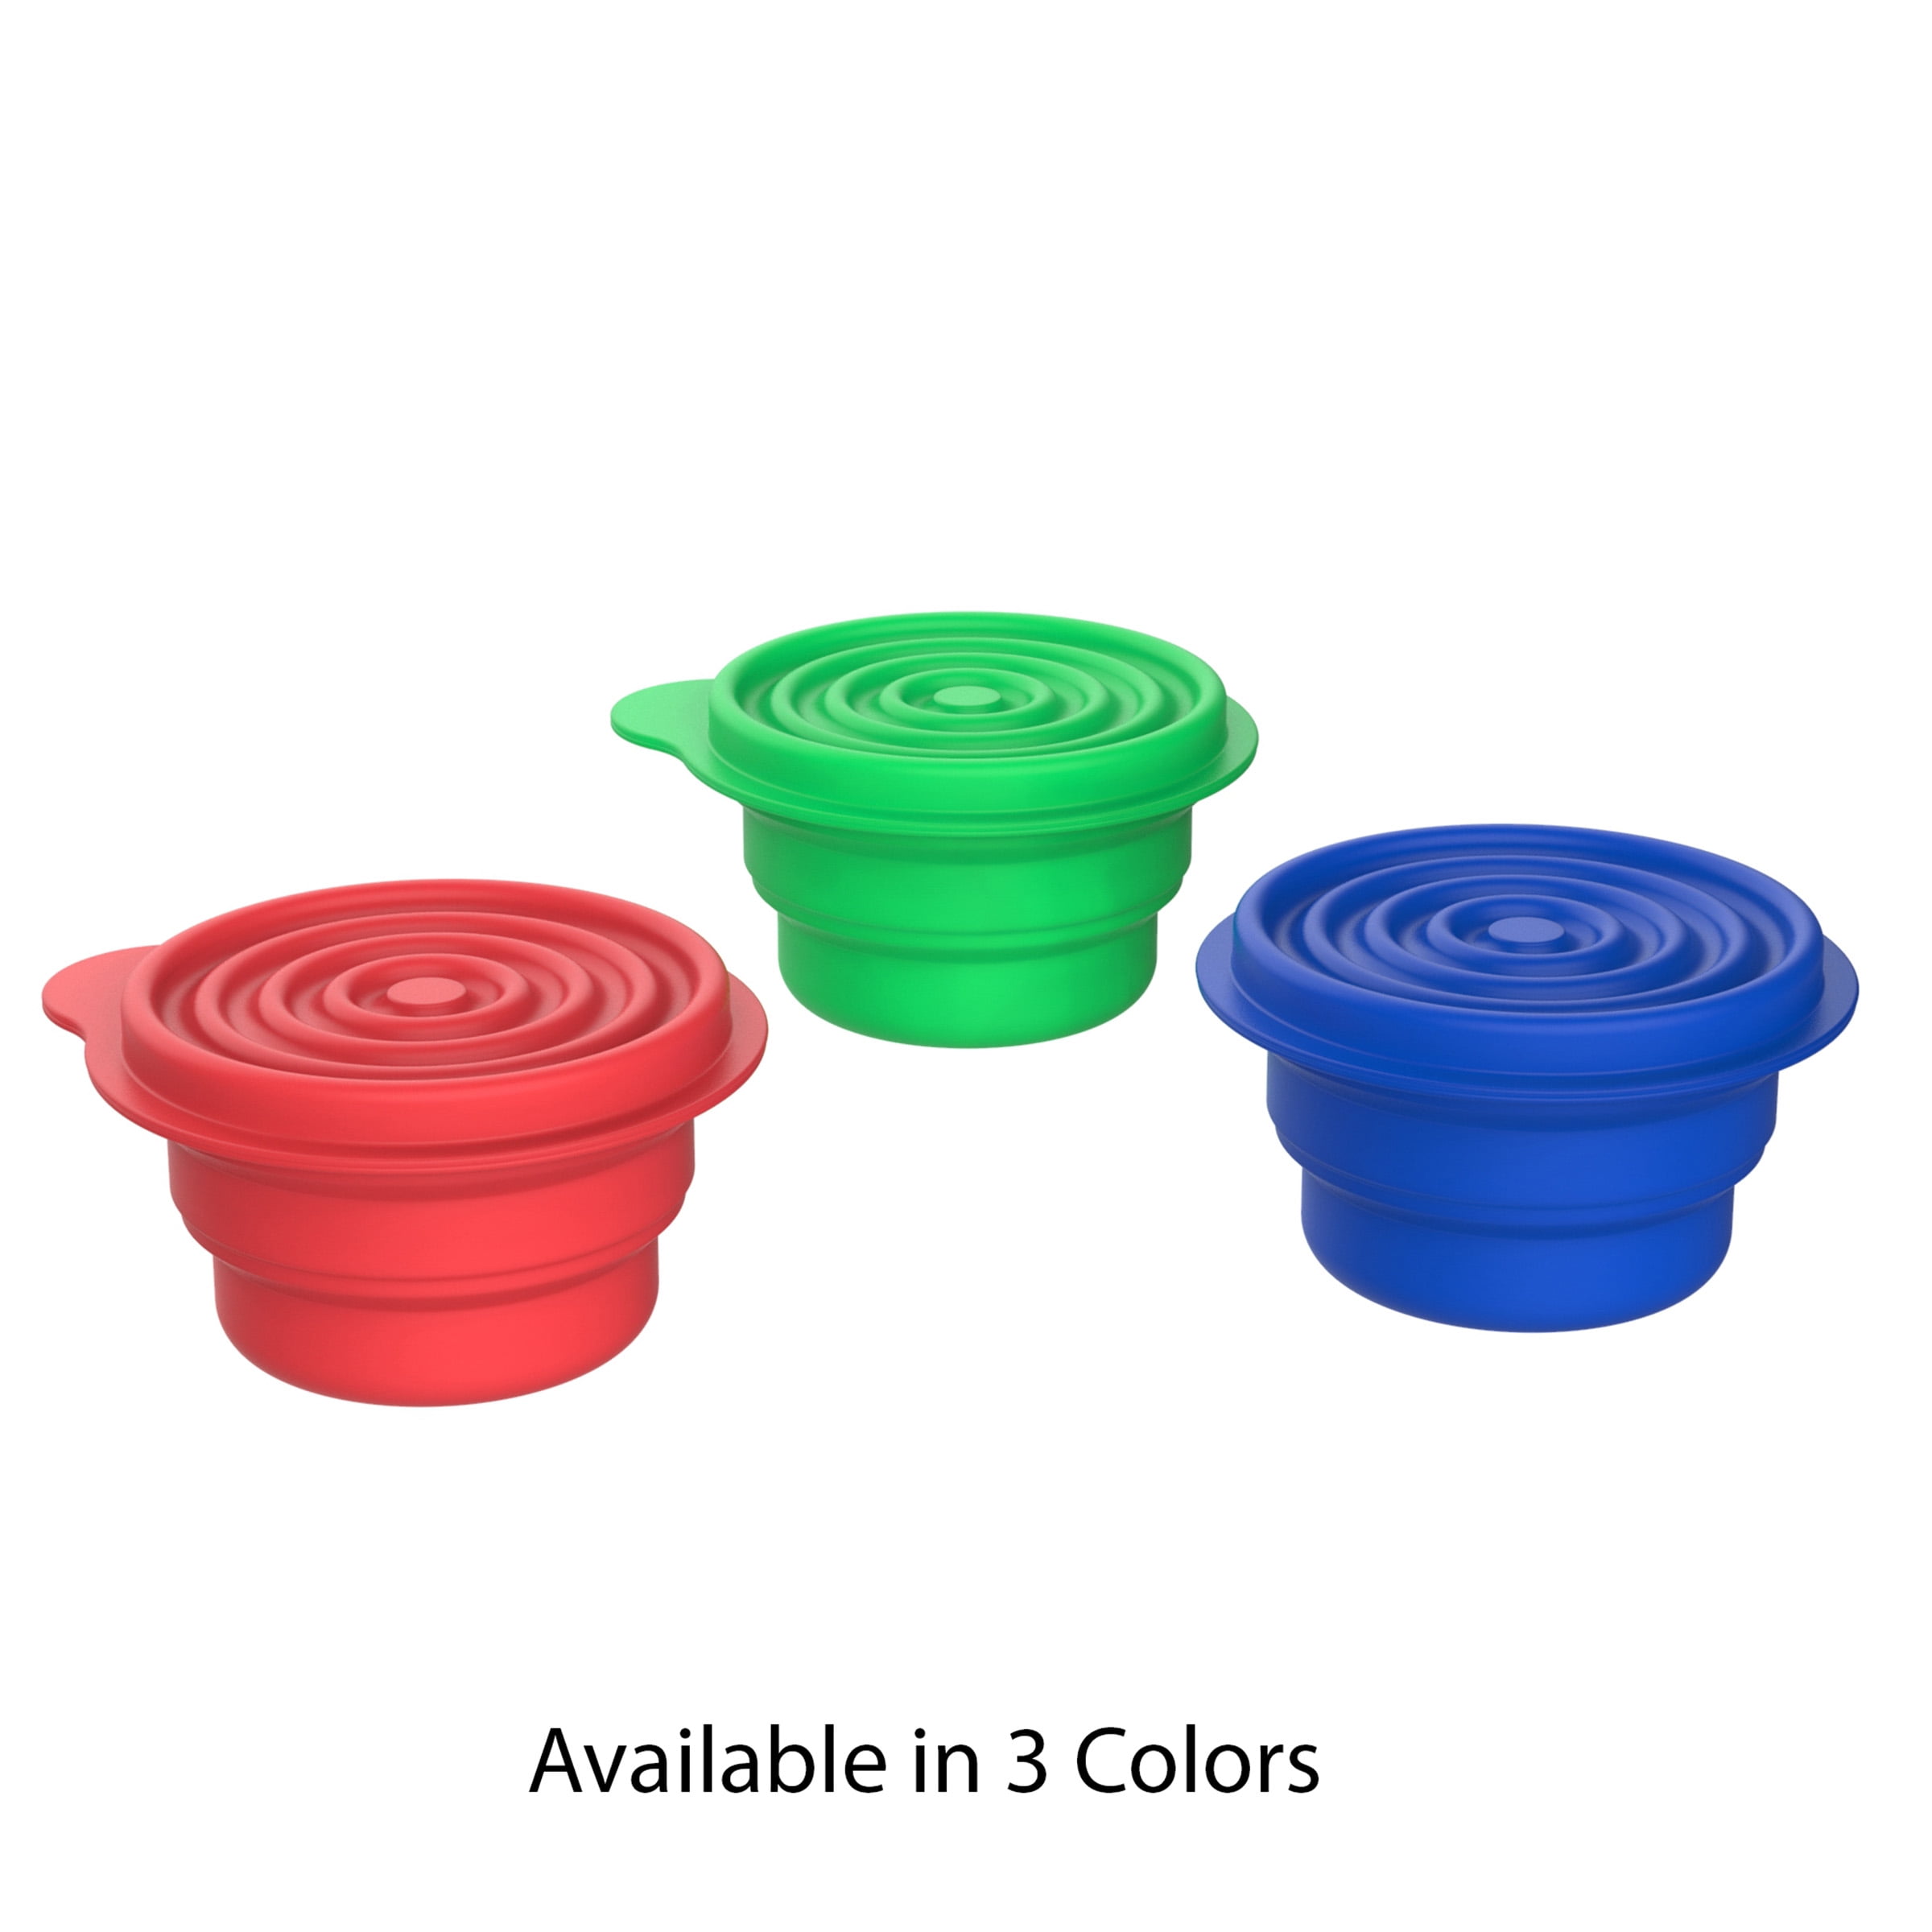 YAPROMO 1000 ML Collapsible Travel Bowl Silicone Pet Bowl with Lid Camping  Hiking Picnic Bowl Portable Lunch Salad Fruit Bowl Green 1000ML